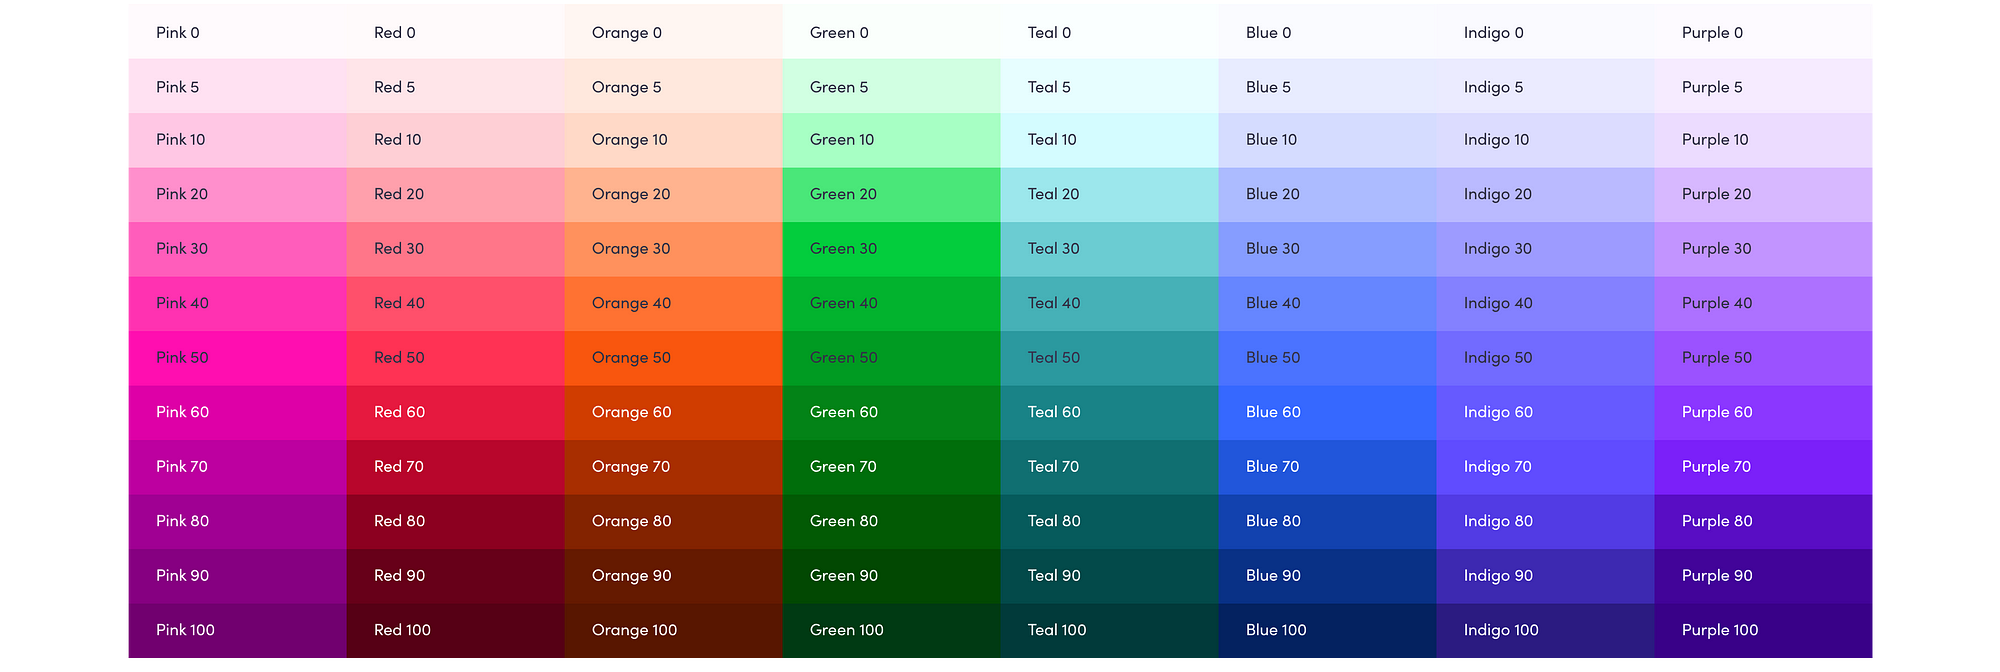 Online generator answers What color is your name?